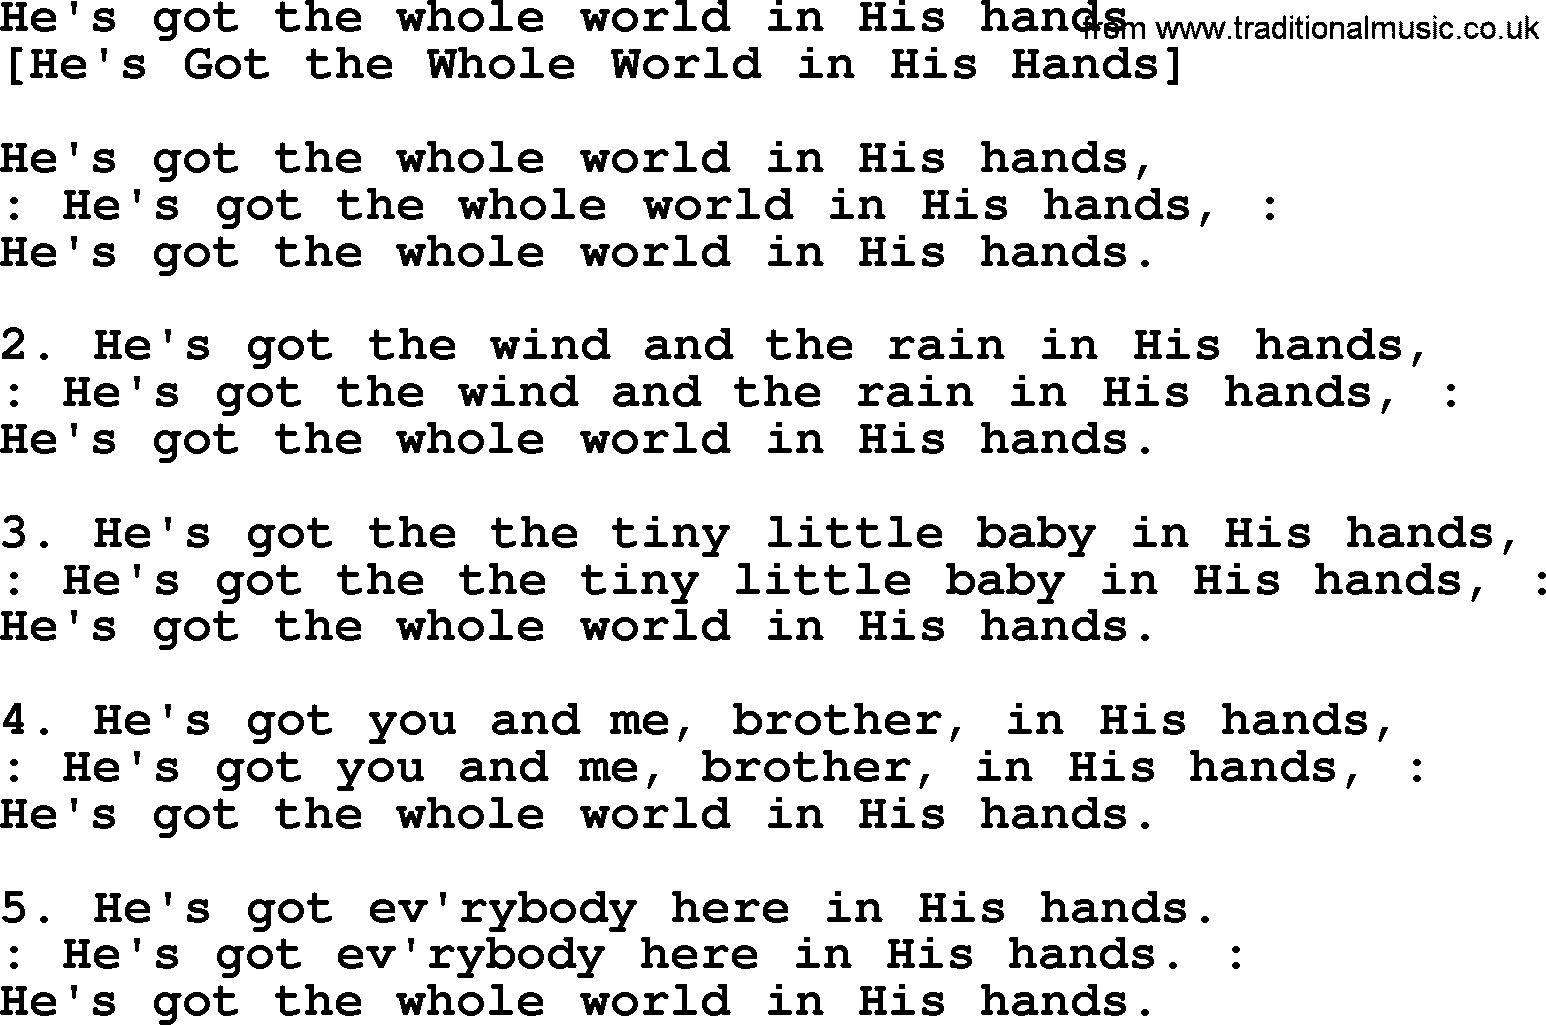 Old American Song: He's Got The Whole World In His Hands, lyrics